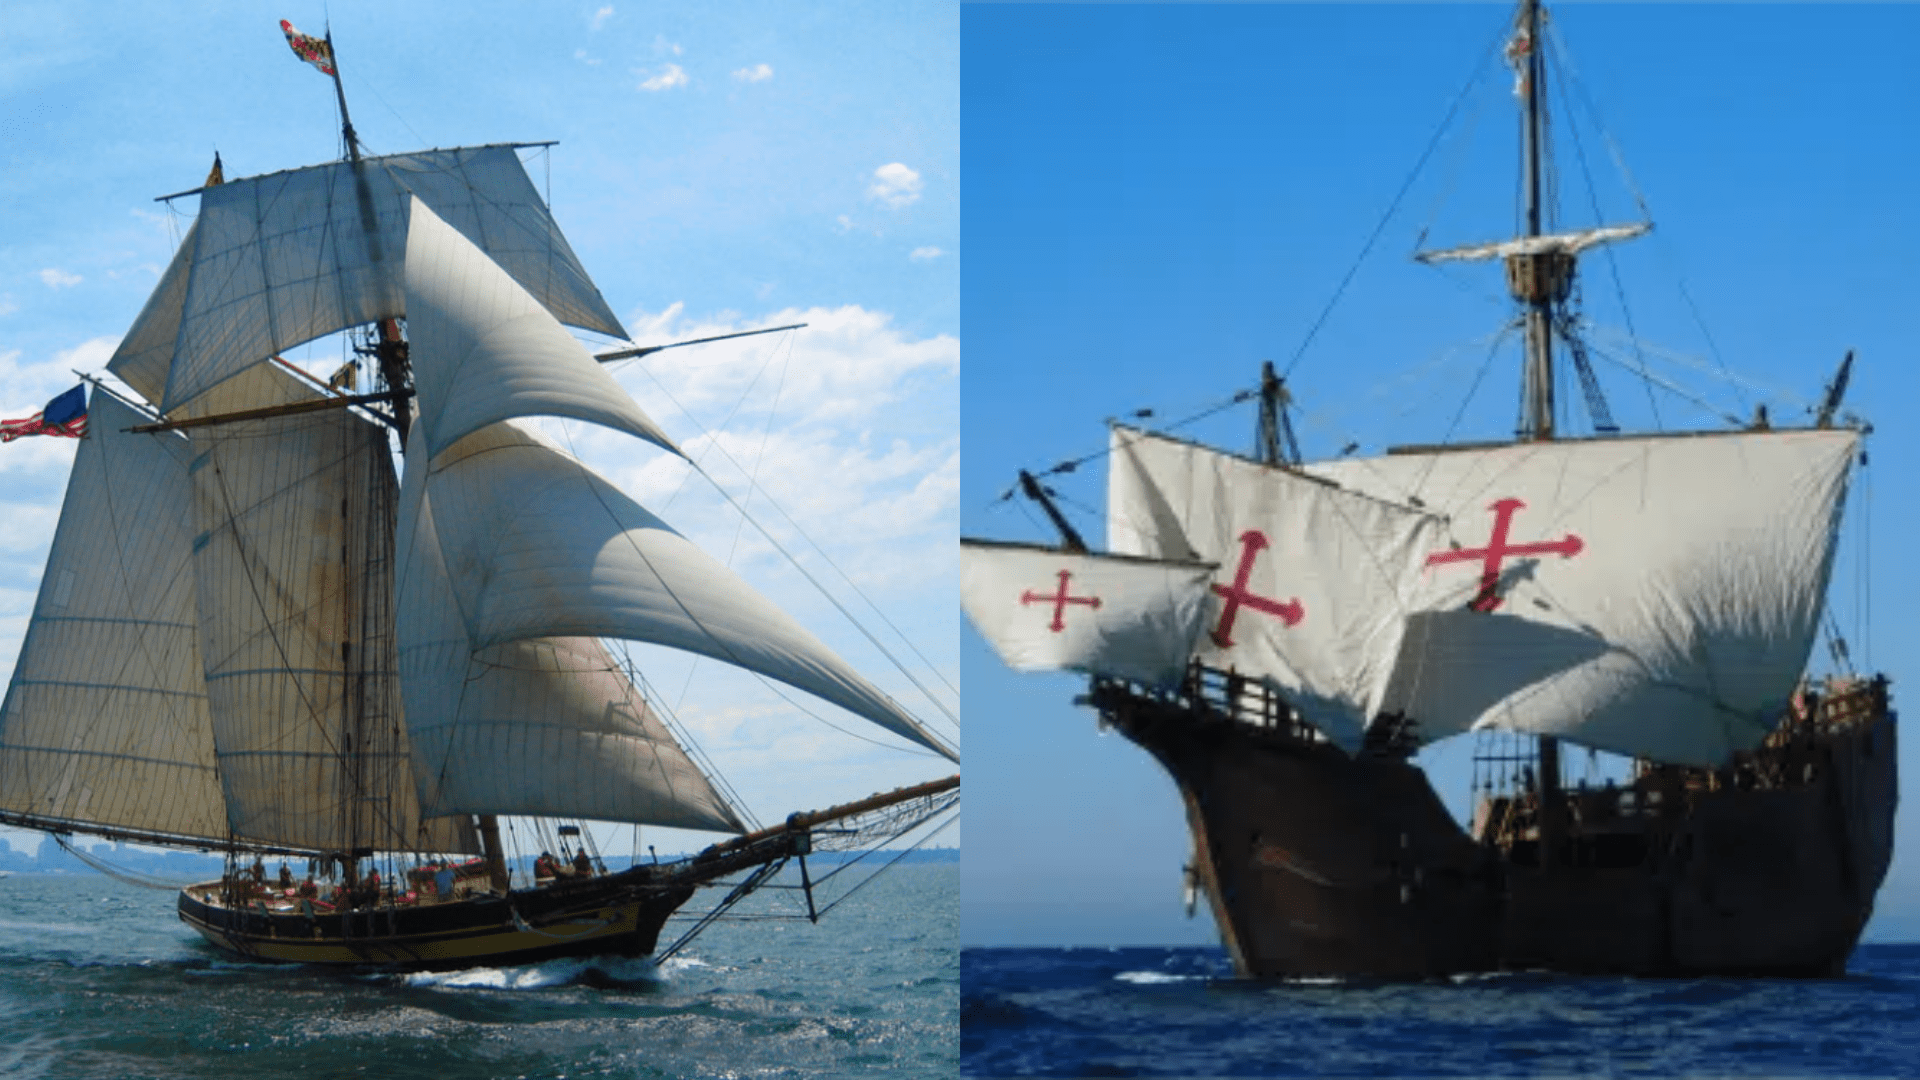 A fourday tall ships festival is coming to St. Pete this weekend I